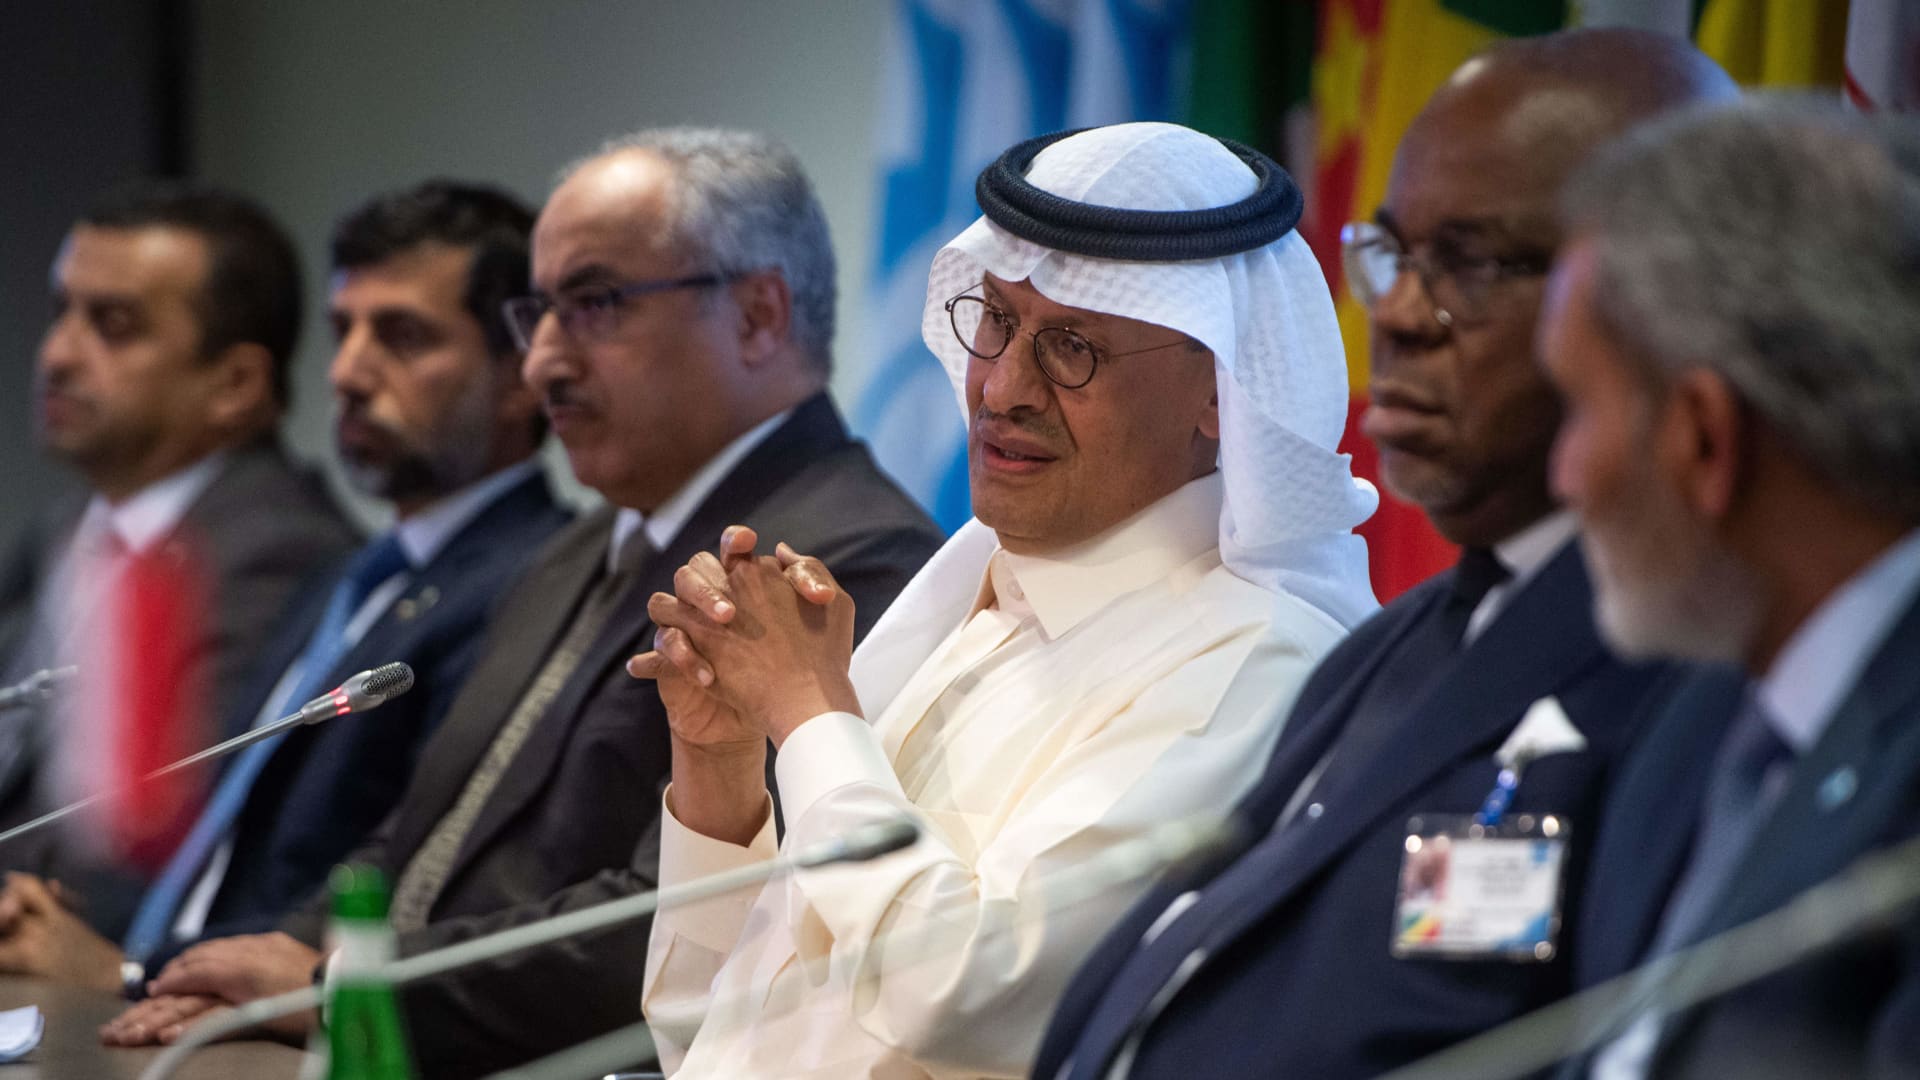 OPEC+ agrees to stick to its existing policy of reducing oil production ahead of Russia sanctions